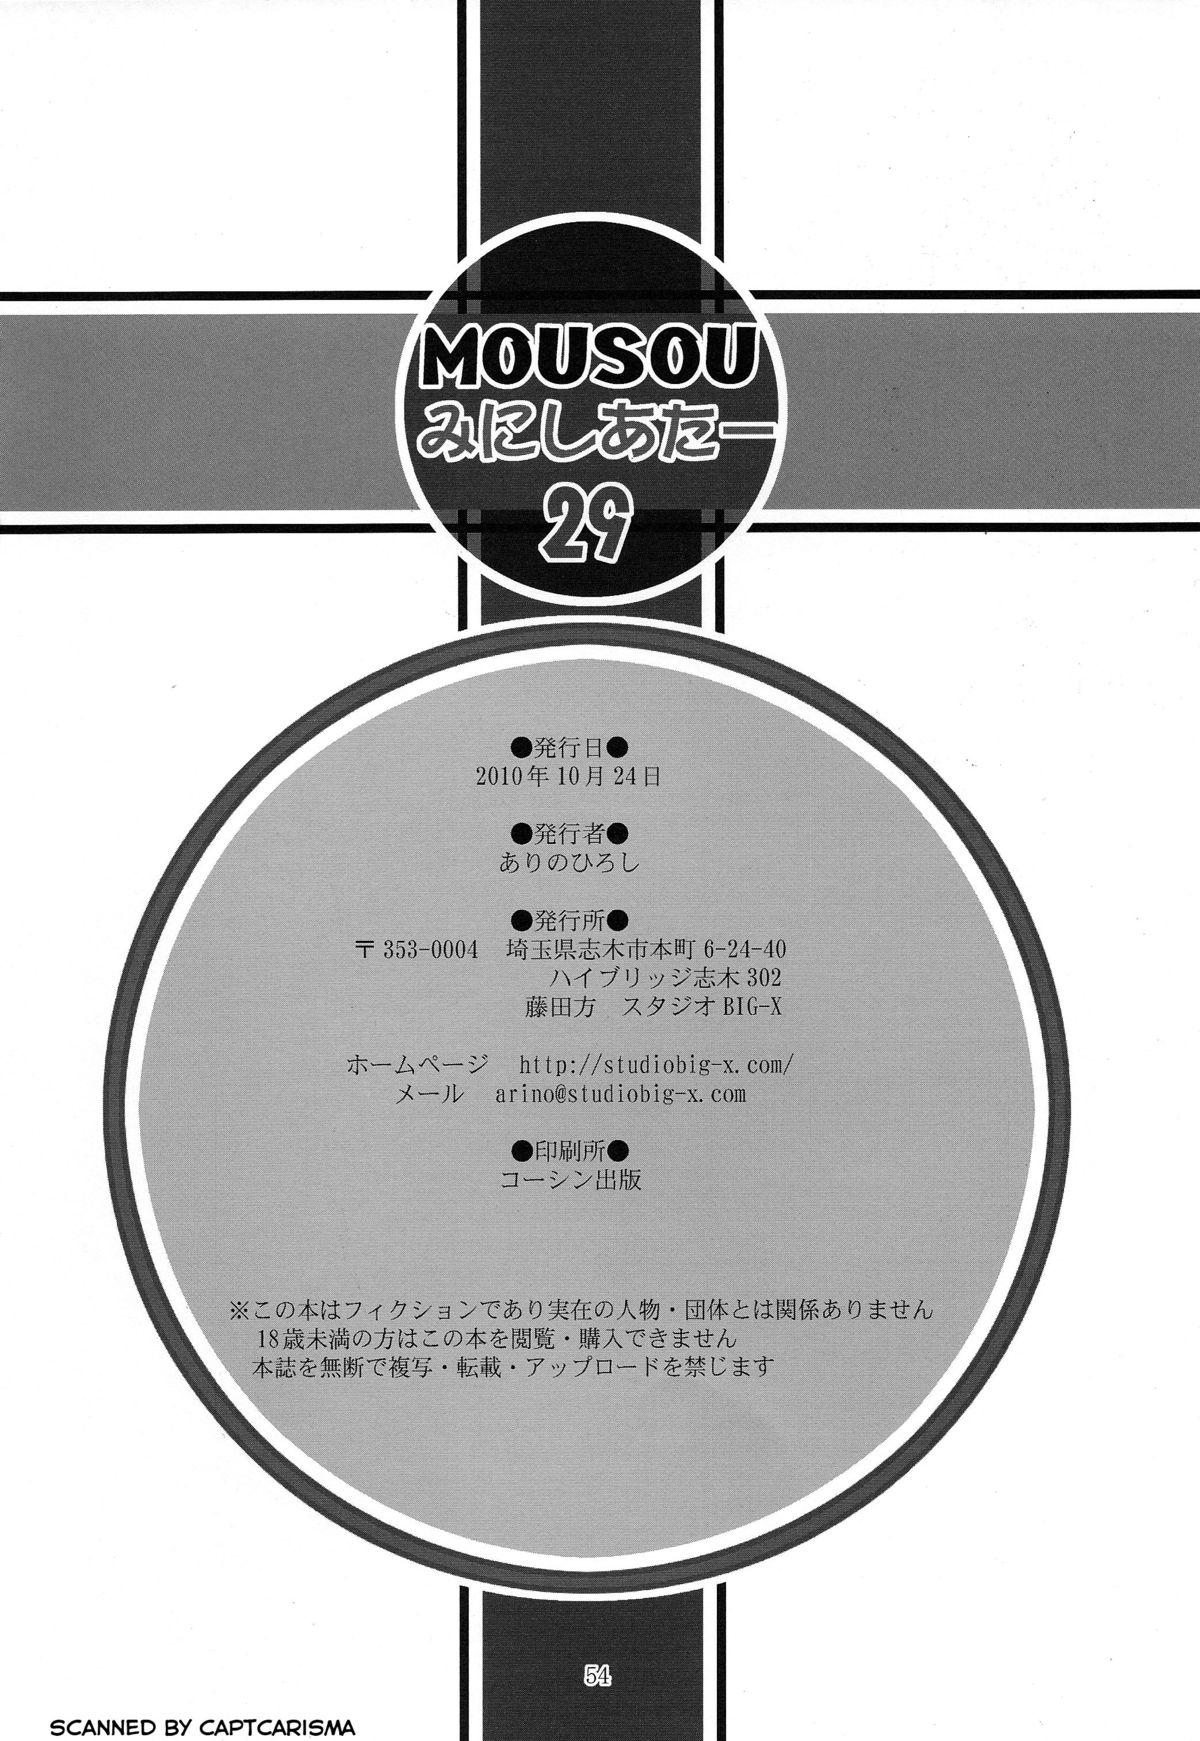 MOUSOU THEATER 29 53